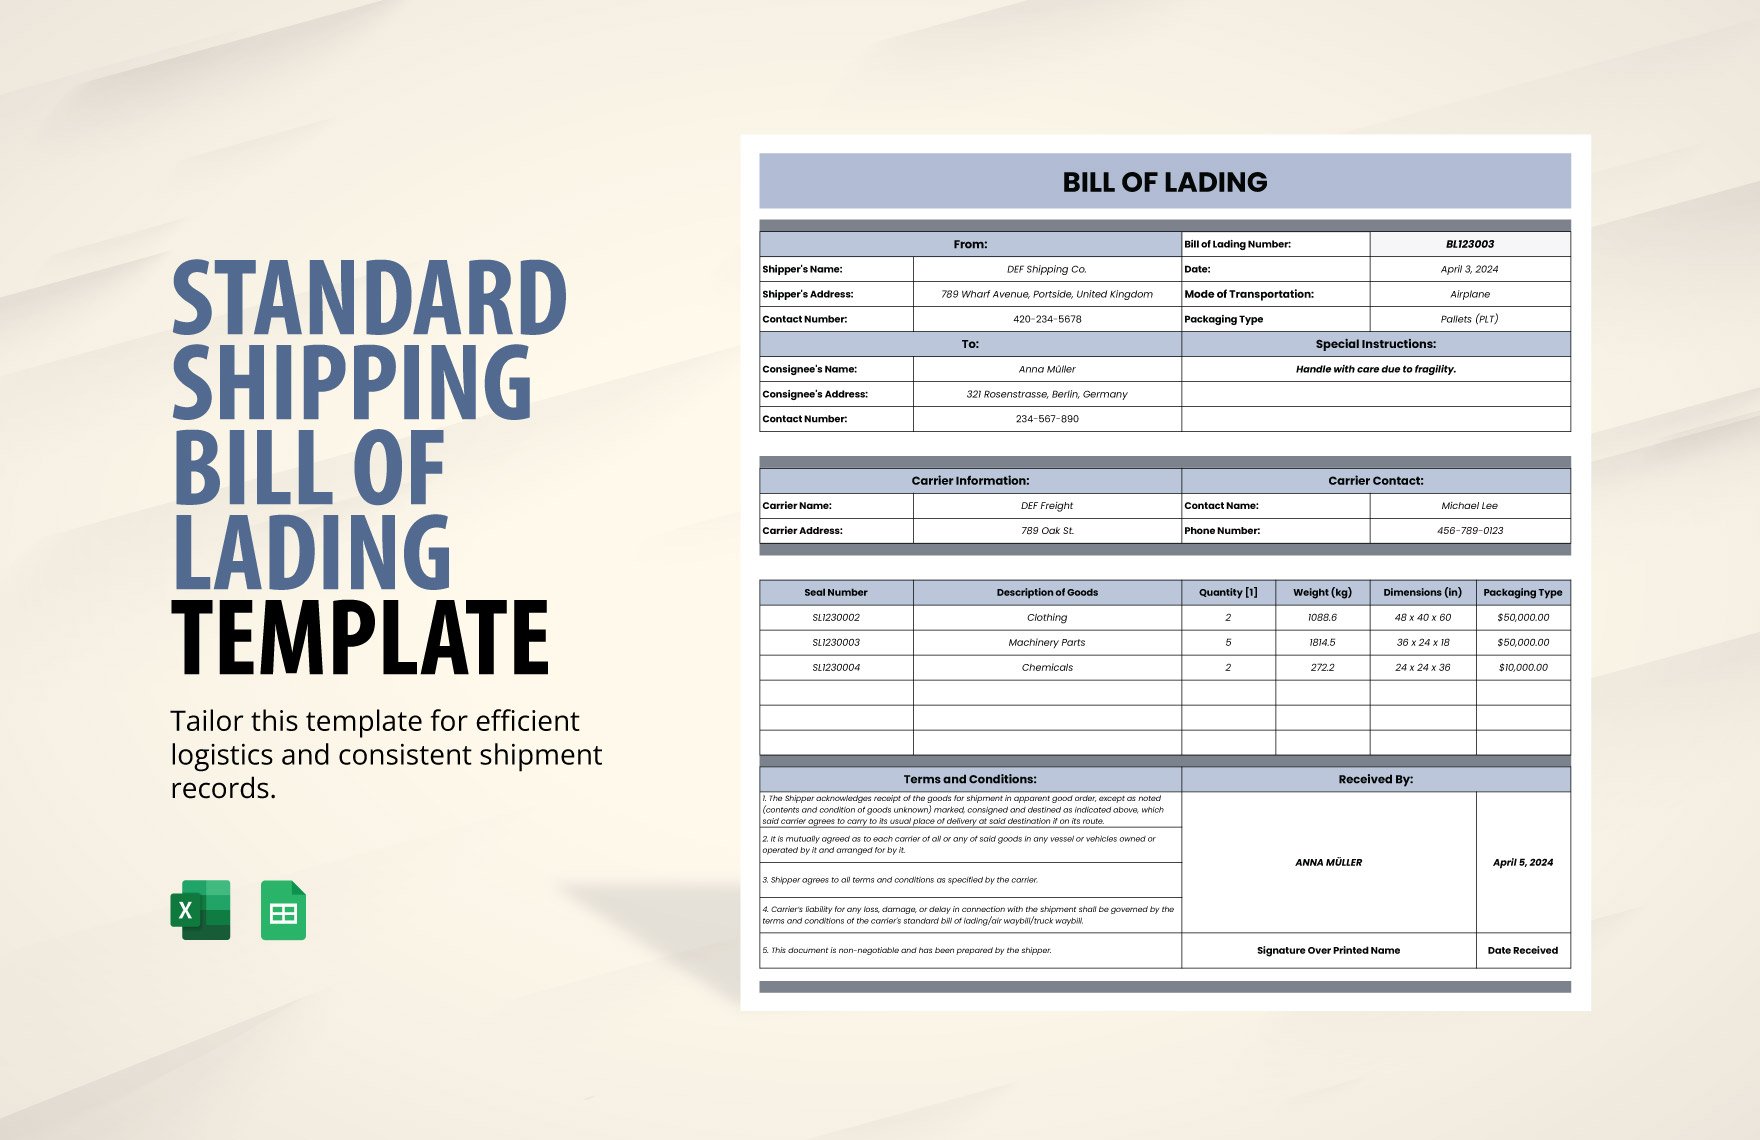 Standard Shipping Bill of Lading Template